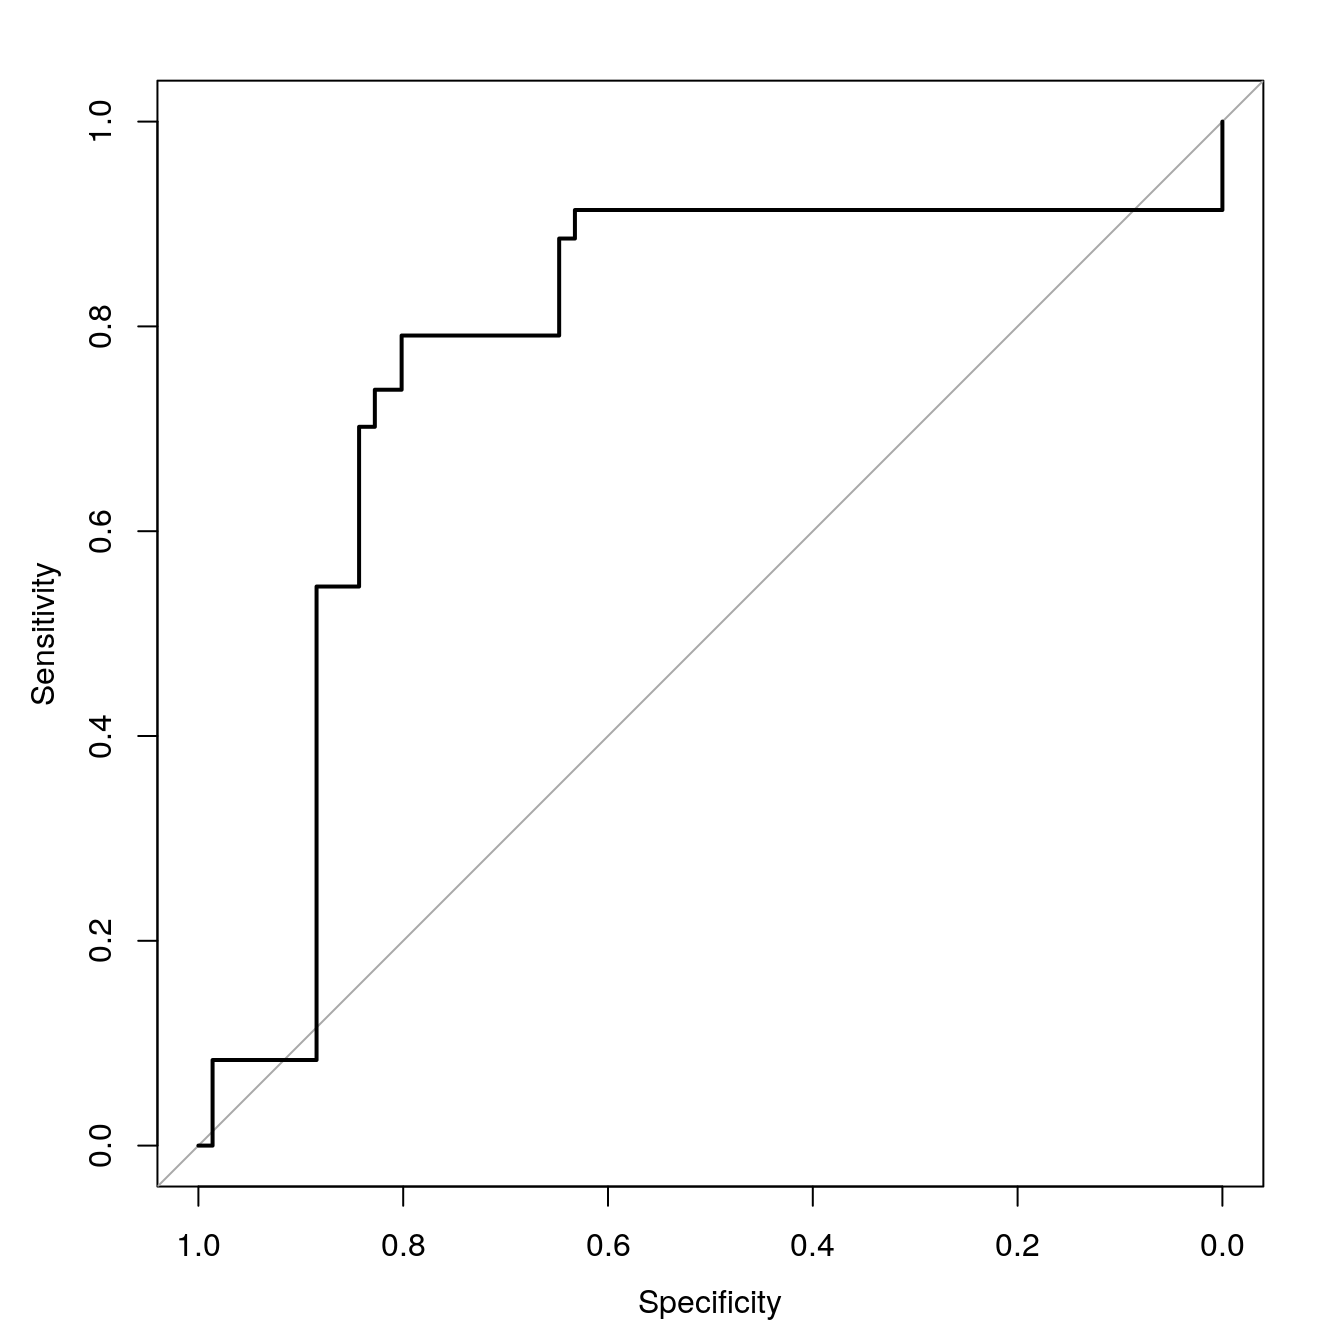 dtree ROC curve for cell segmentation data set.